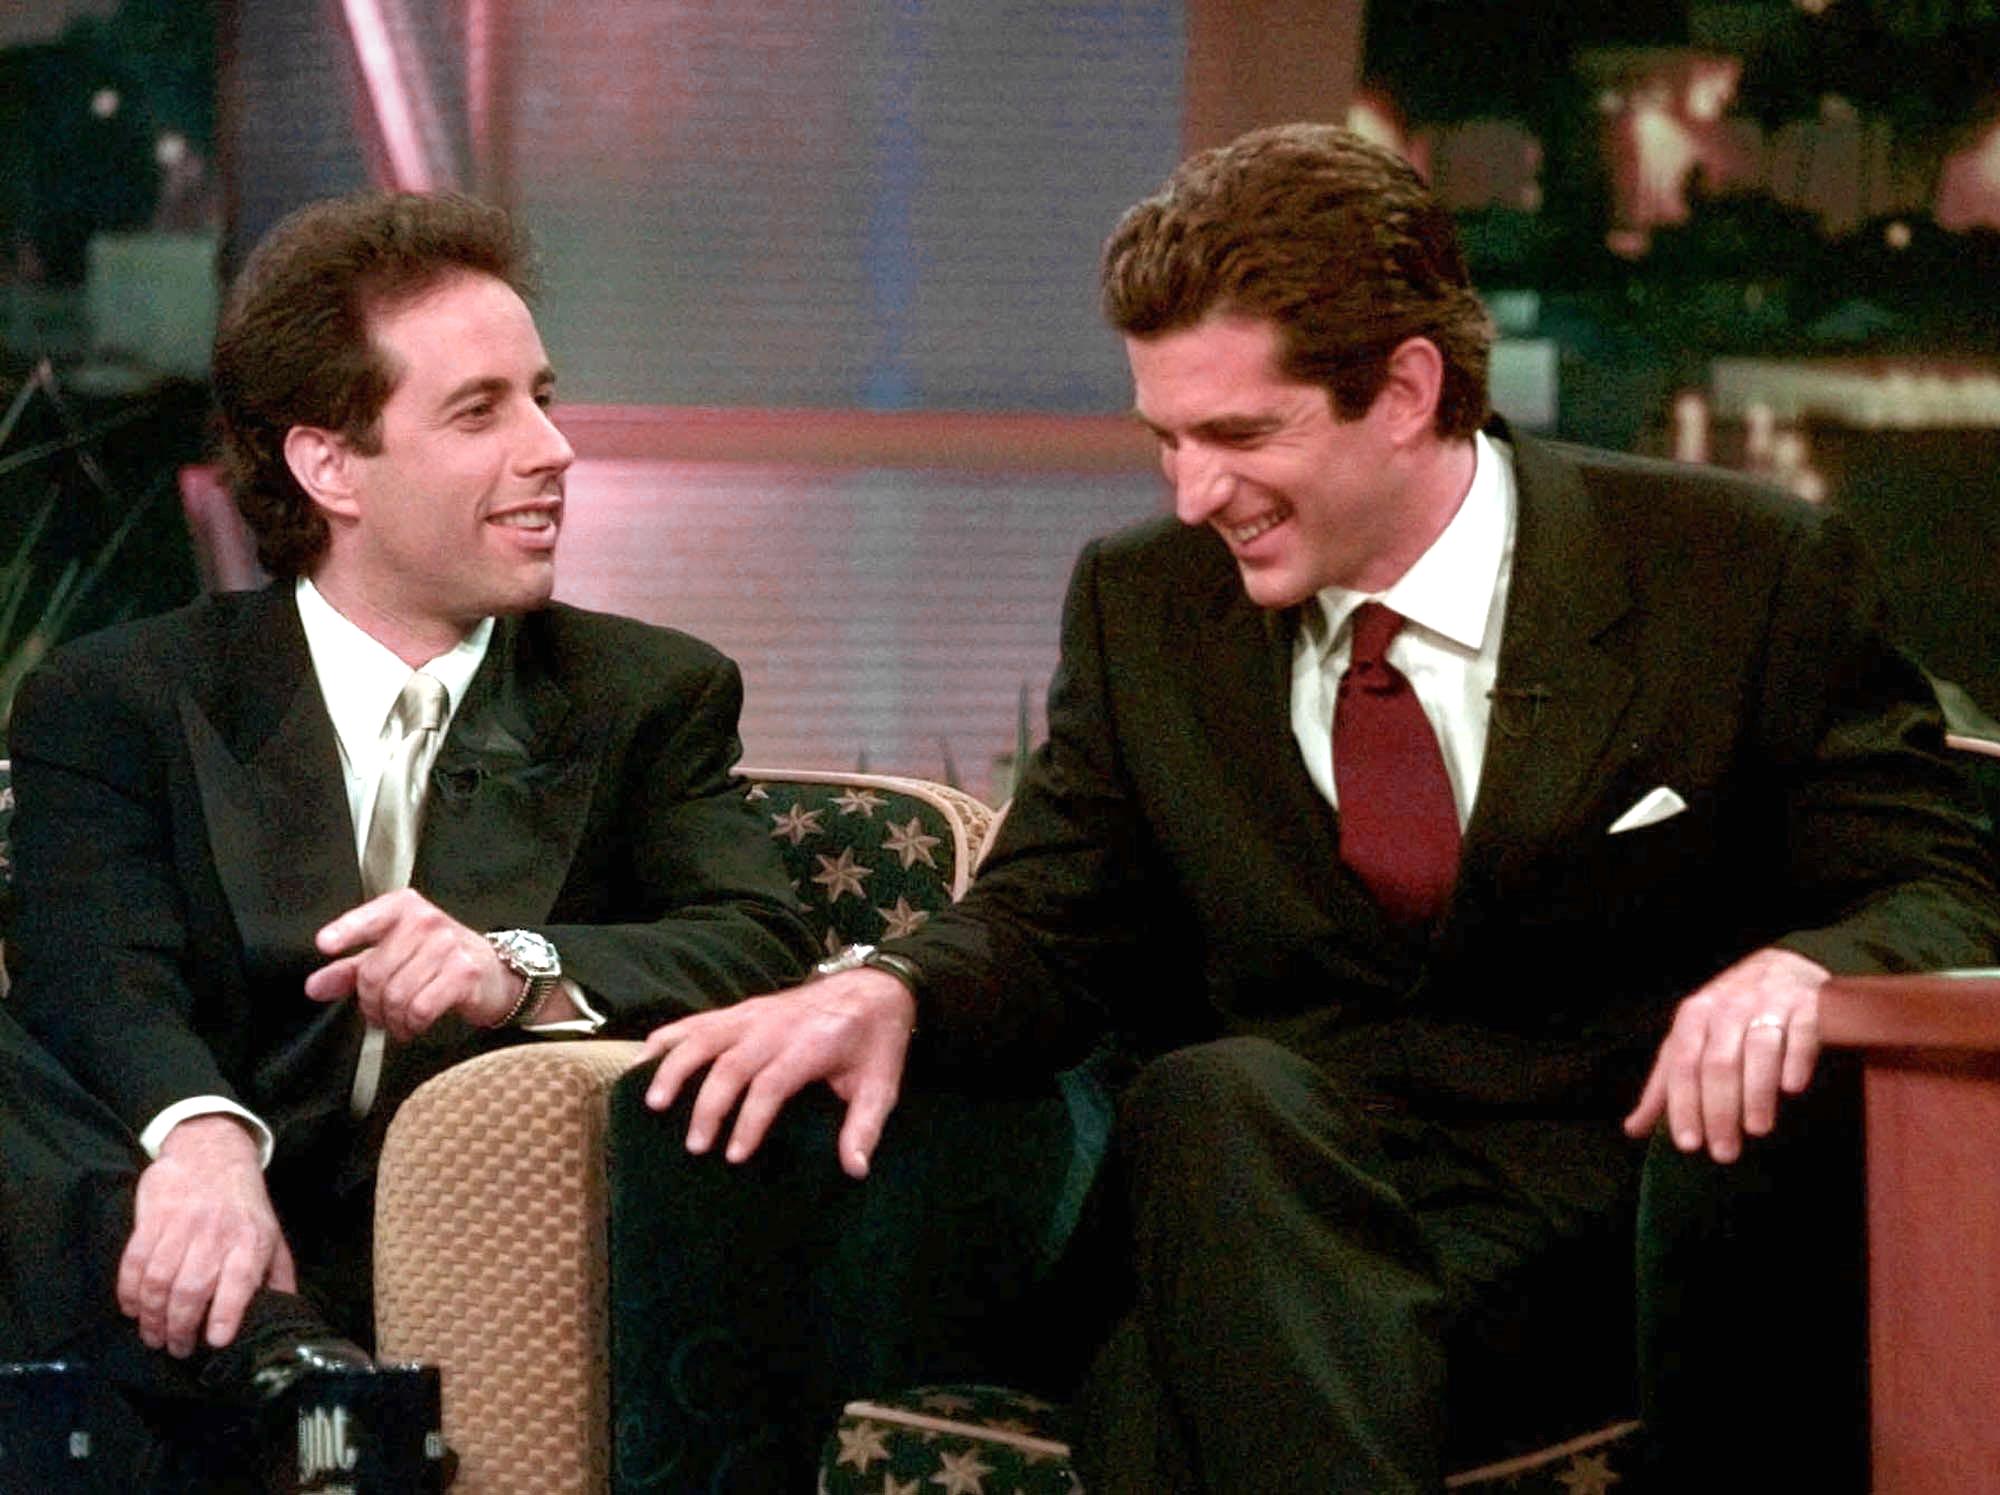 Television star Jerry Seinfeld (L) in a conversation with John F. Kennedy Jr. during the taping of "The Tonight Show With Jay Leno" in Burbank, California on May 14 1998 | Source: Getty Images